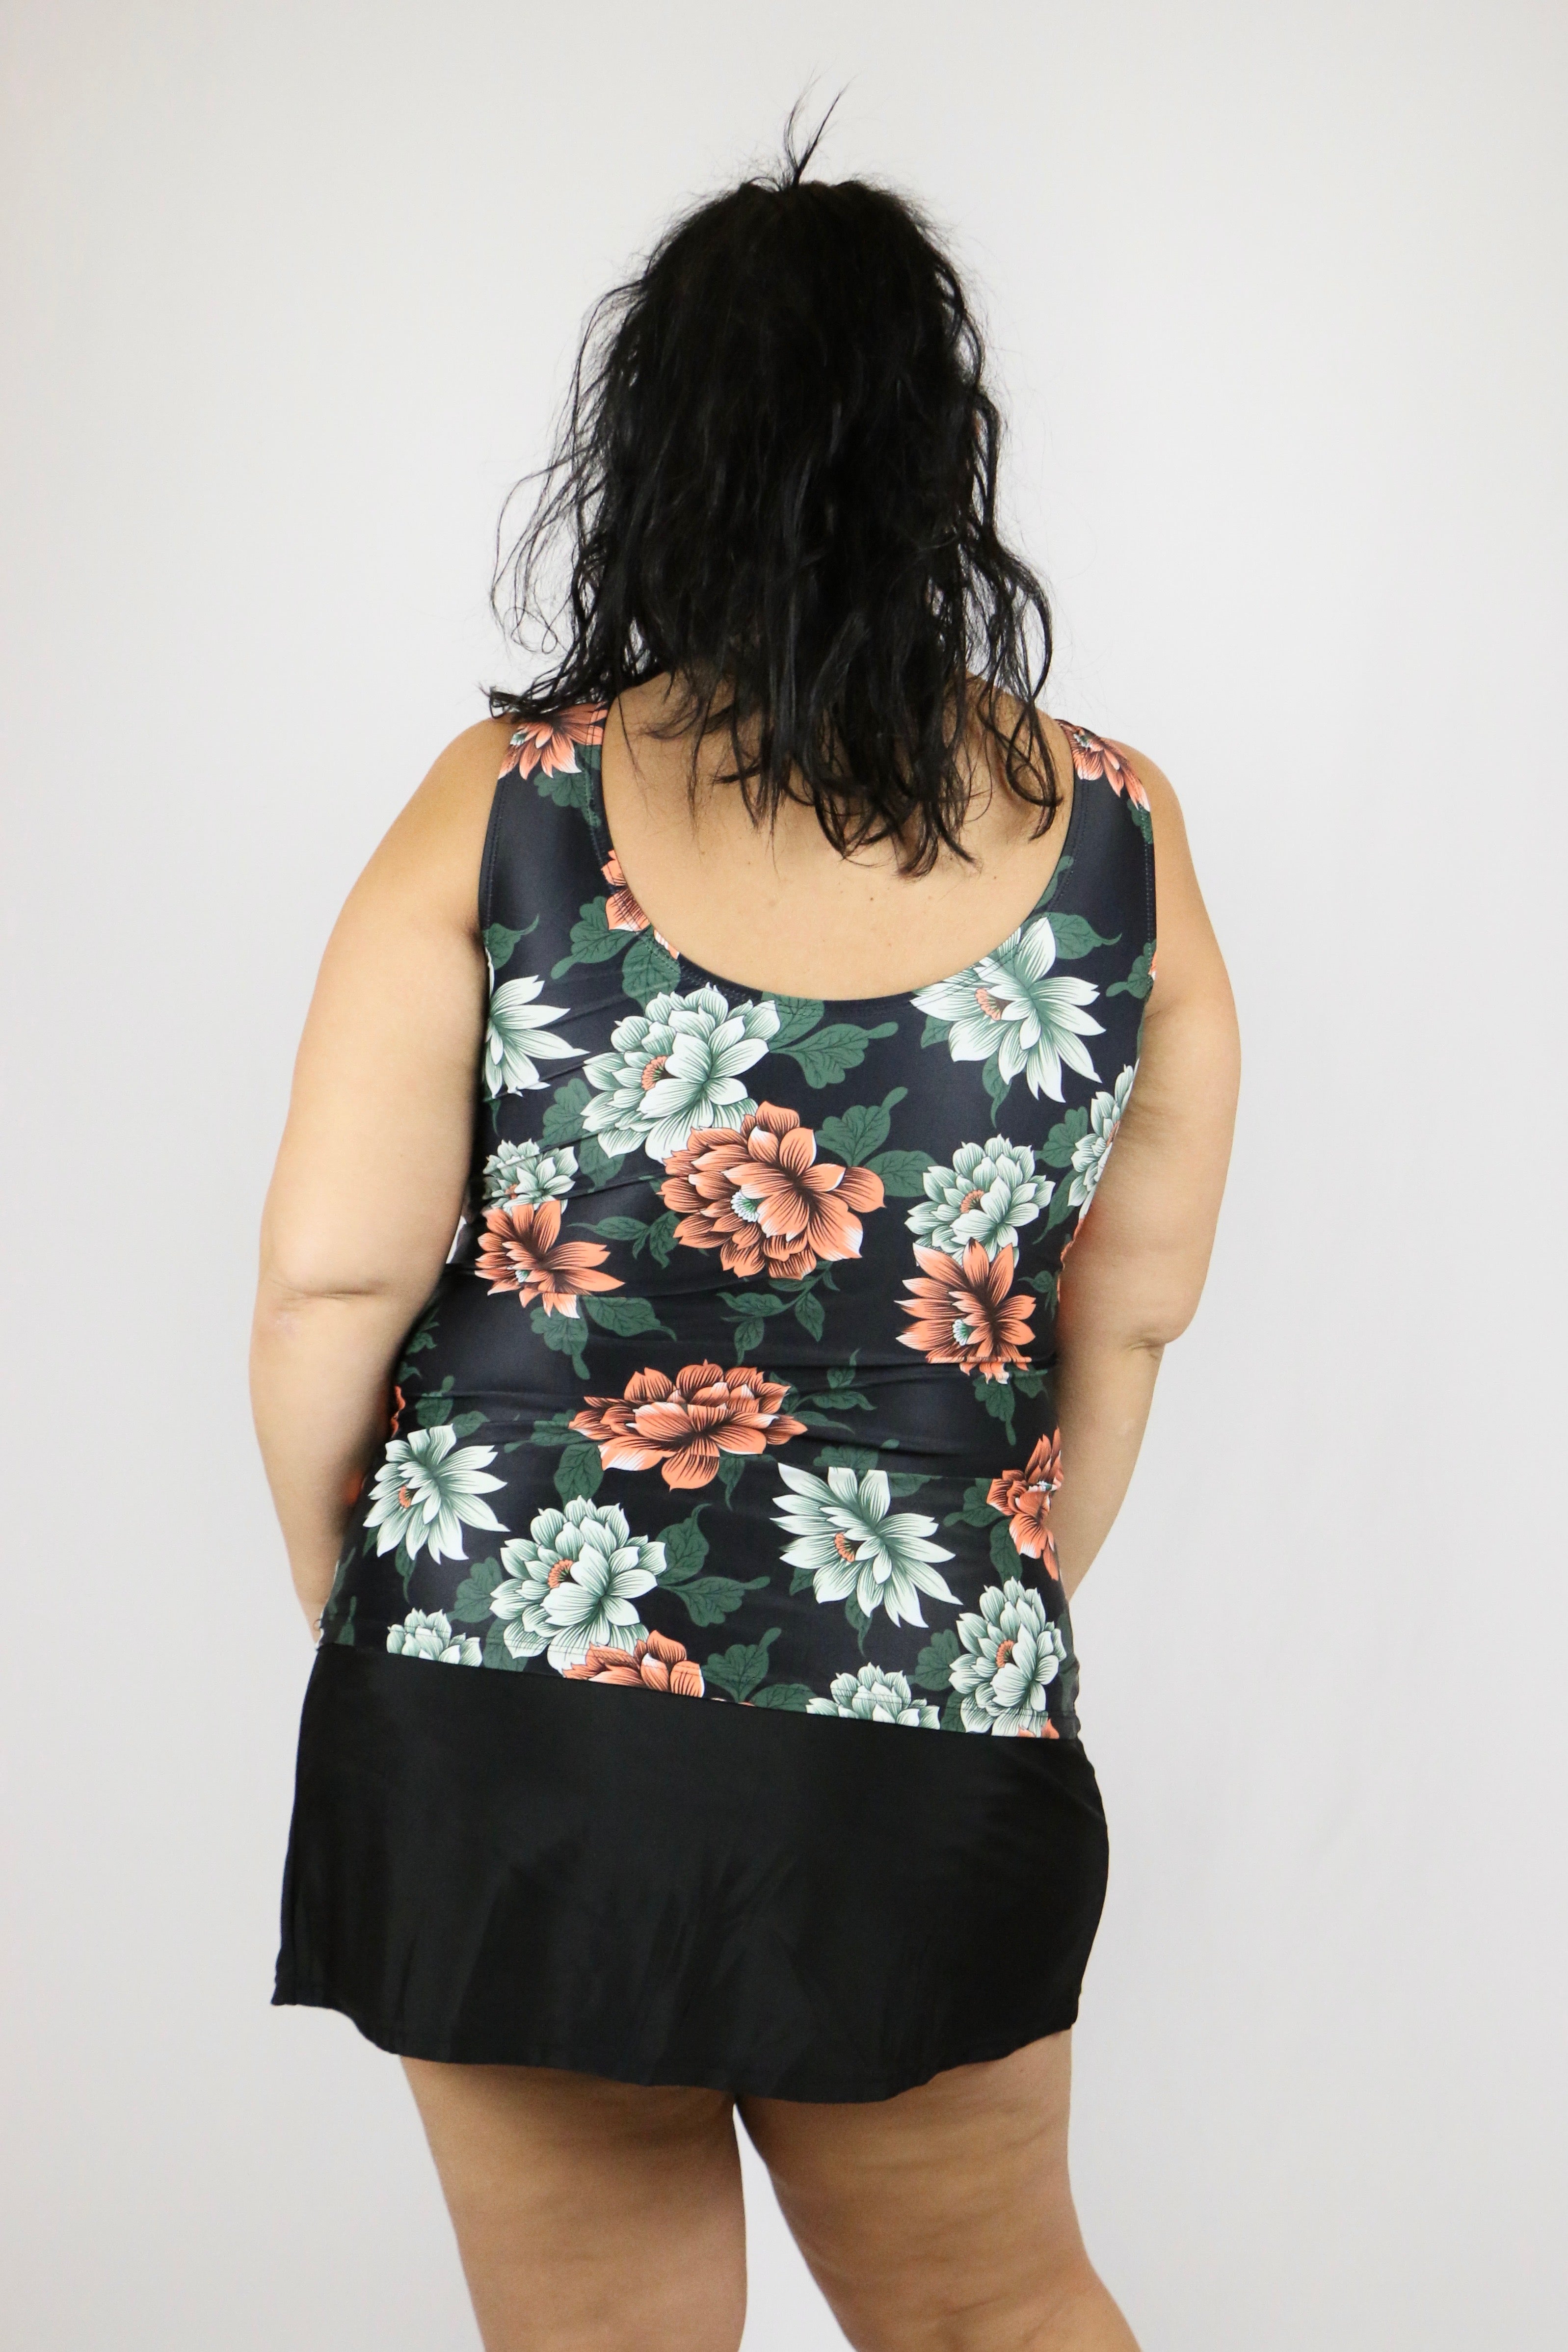 *RESTOCK* Floral Cove Top (Curvy Only)